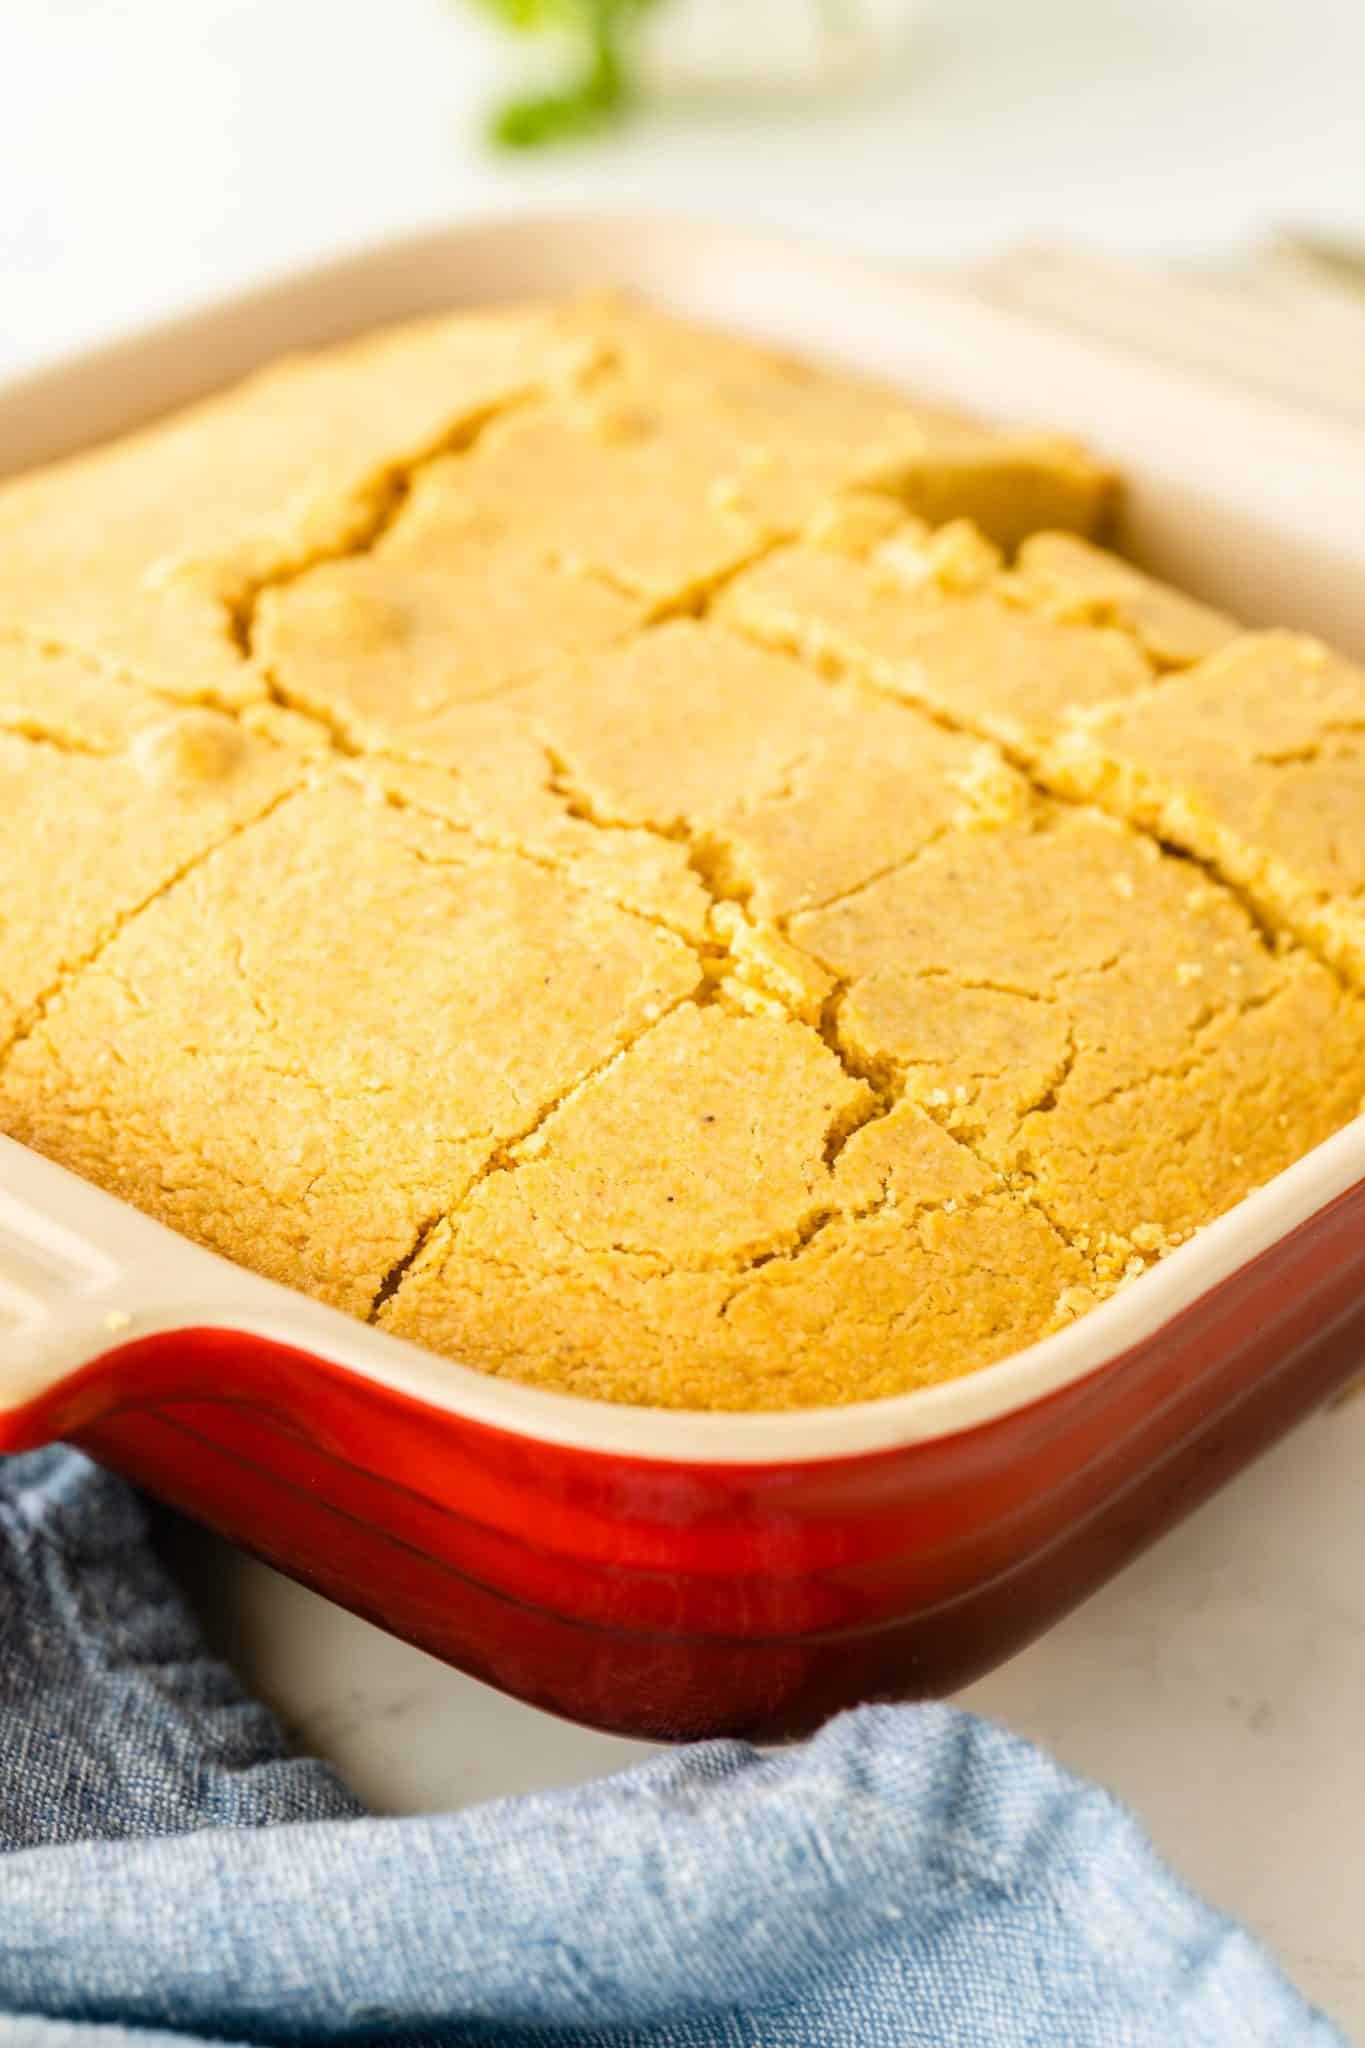 A close up of a pan of cornbread with a slice missing